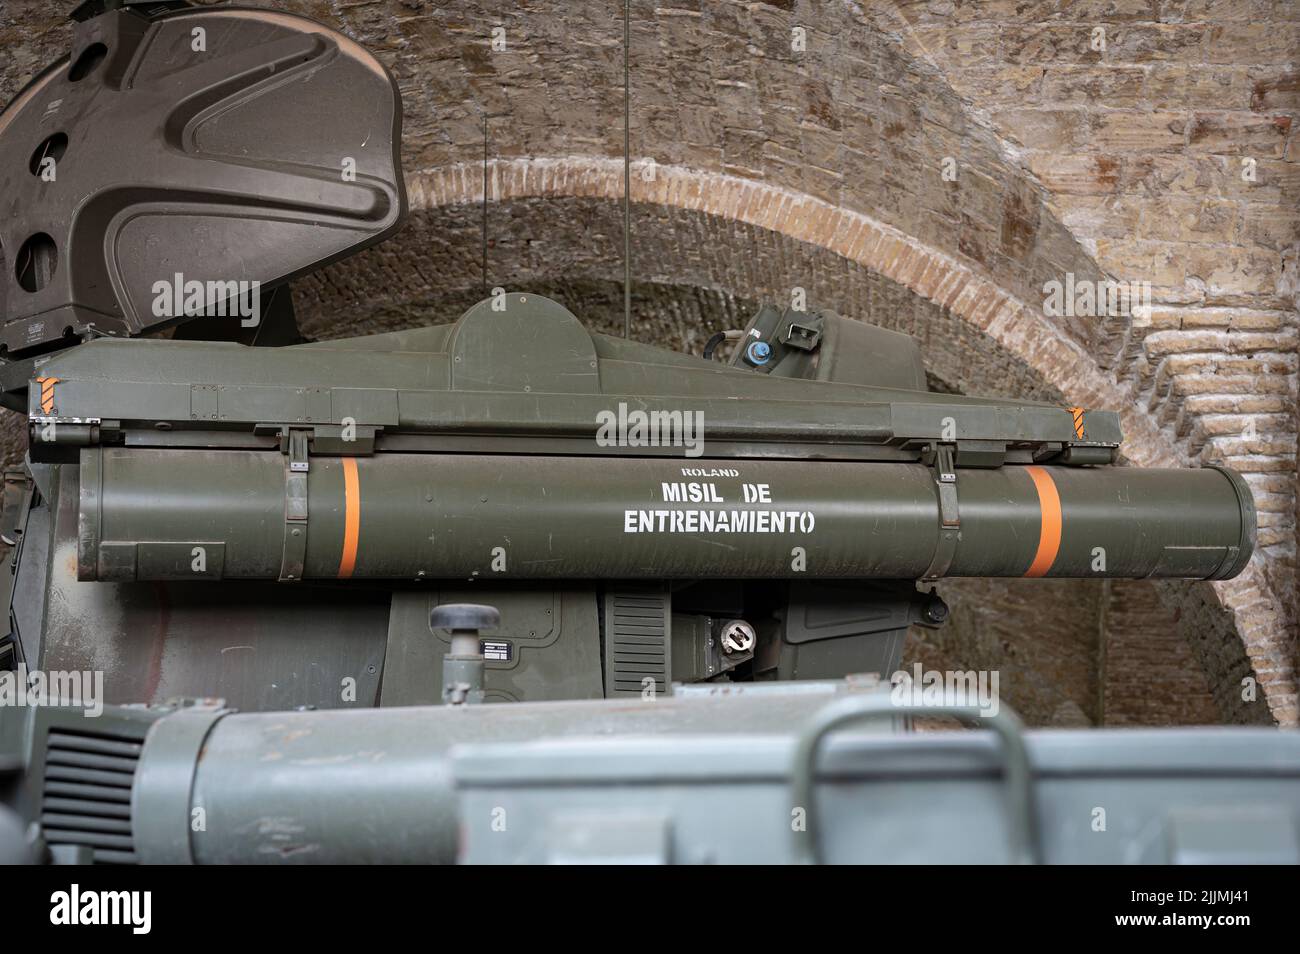 A military training missile in the tank turret. Stock Photo